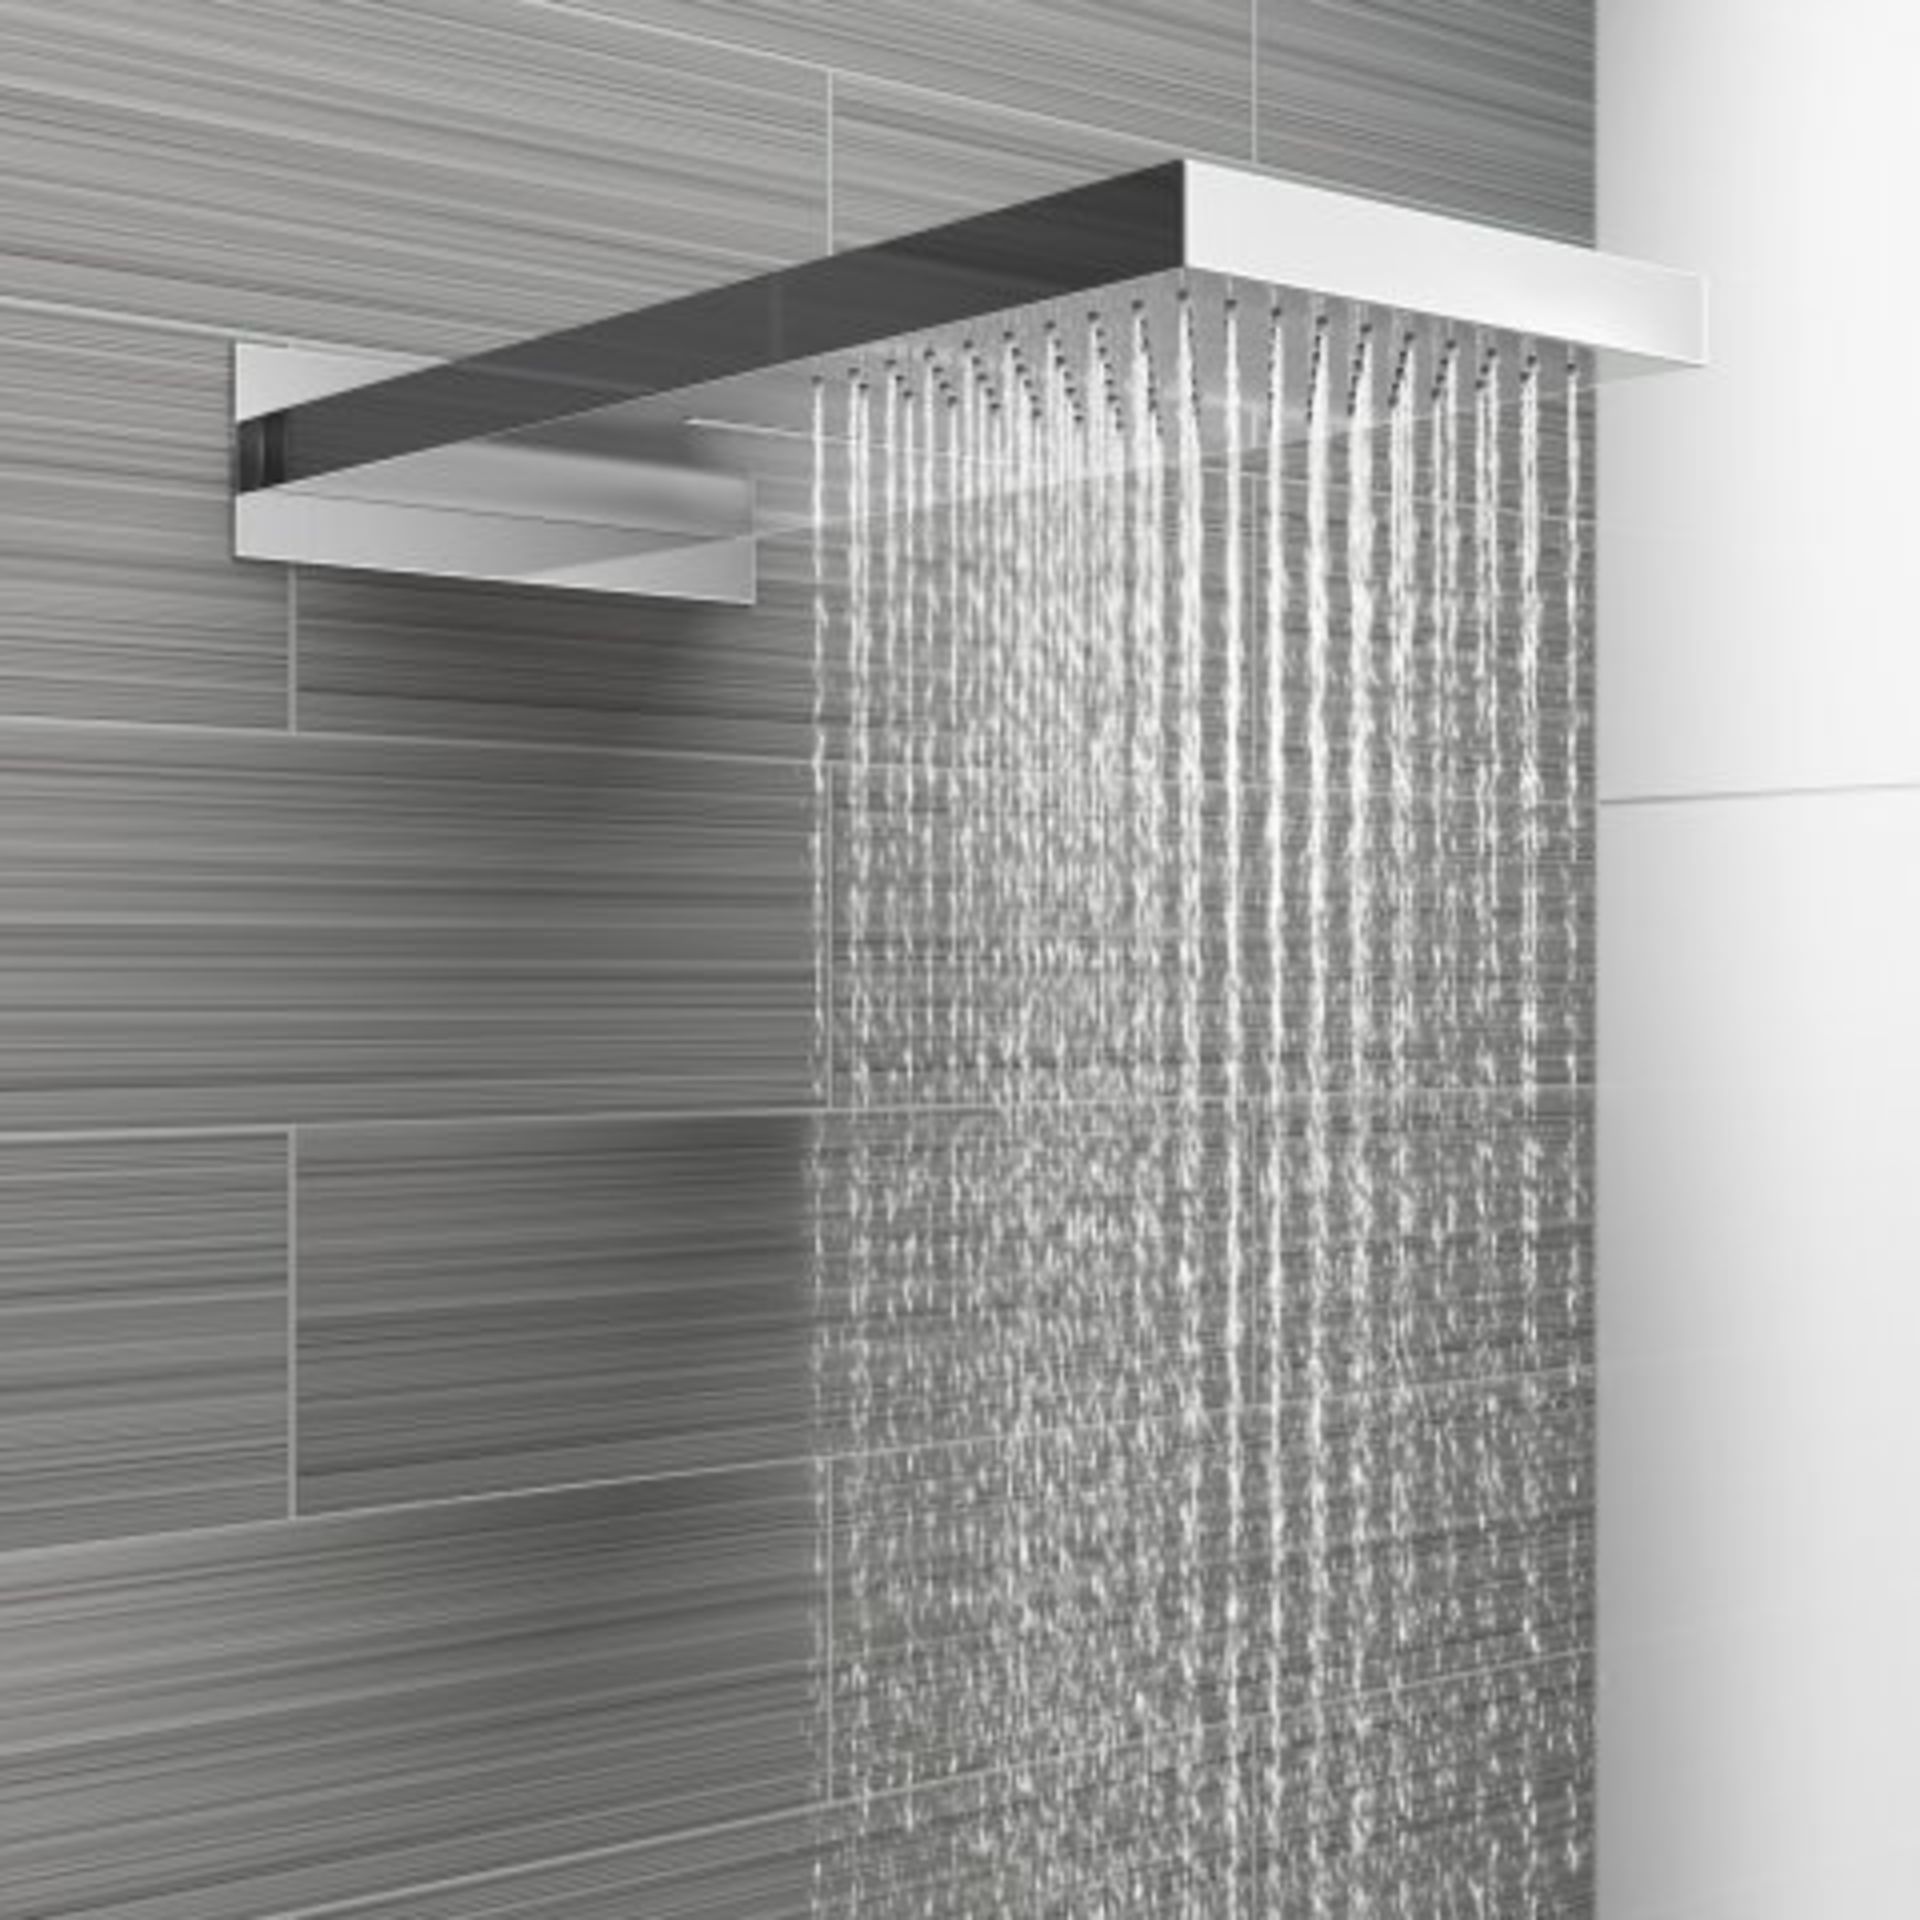 (I22) Stainless Steel 230x500mm Waterfall Shower Head. RRP £374.98. "What An Experience": Enjoy - Image 3 of 5